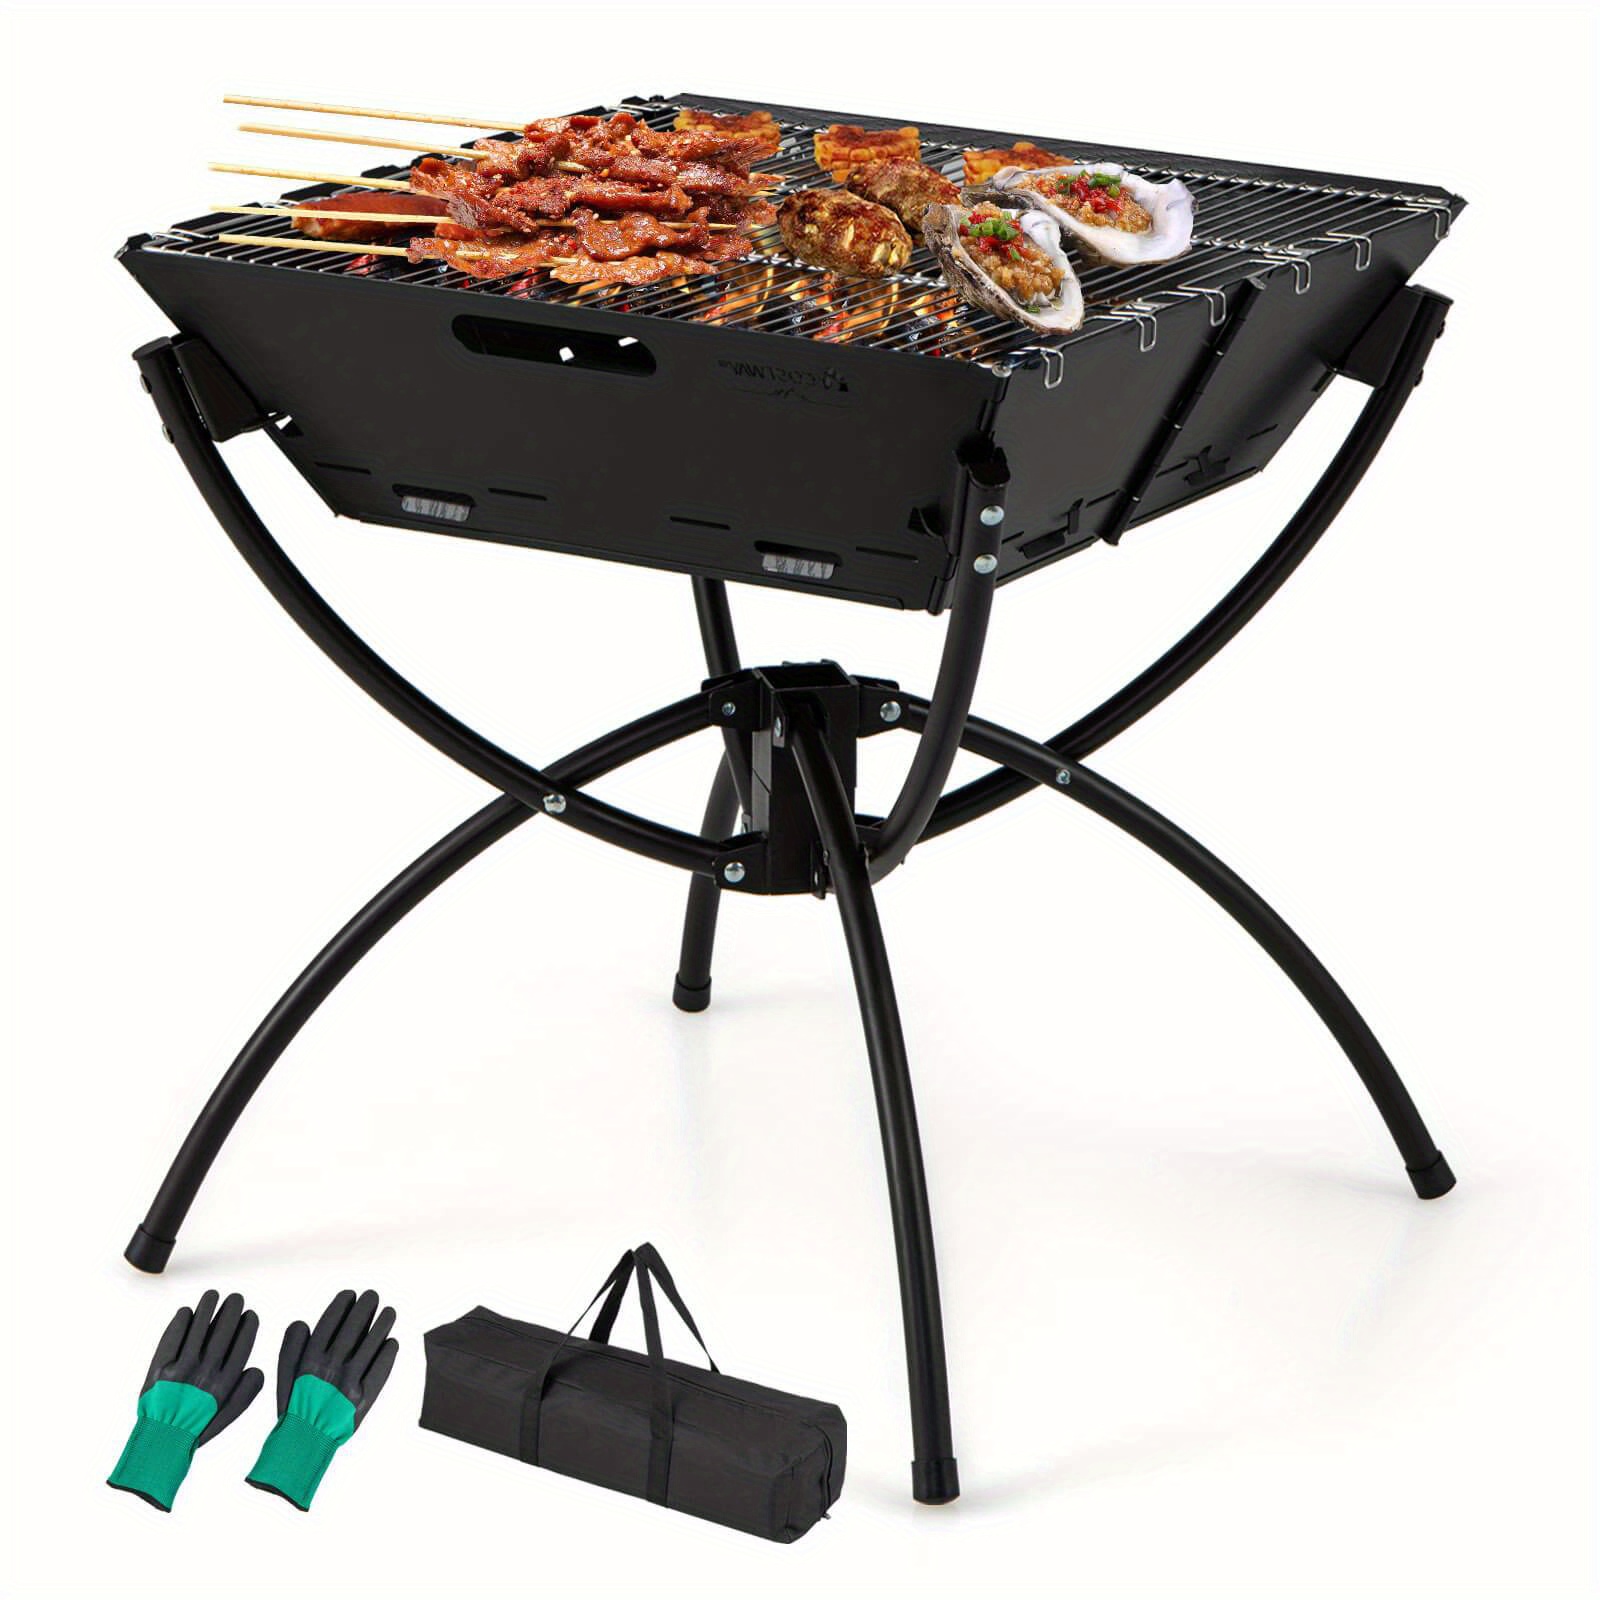 

Gymax 3-in-1 Portable Charcoal Grill Folding Camping Fire Pit W/ Carrying Bag & Gloves